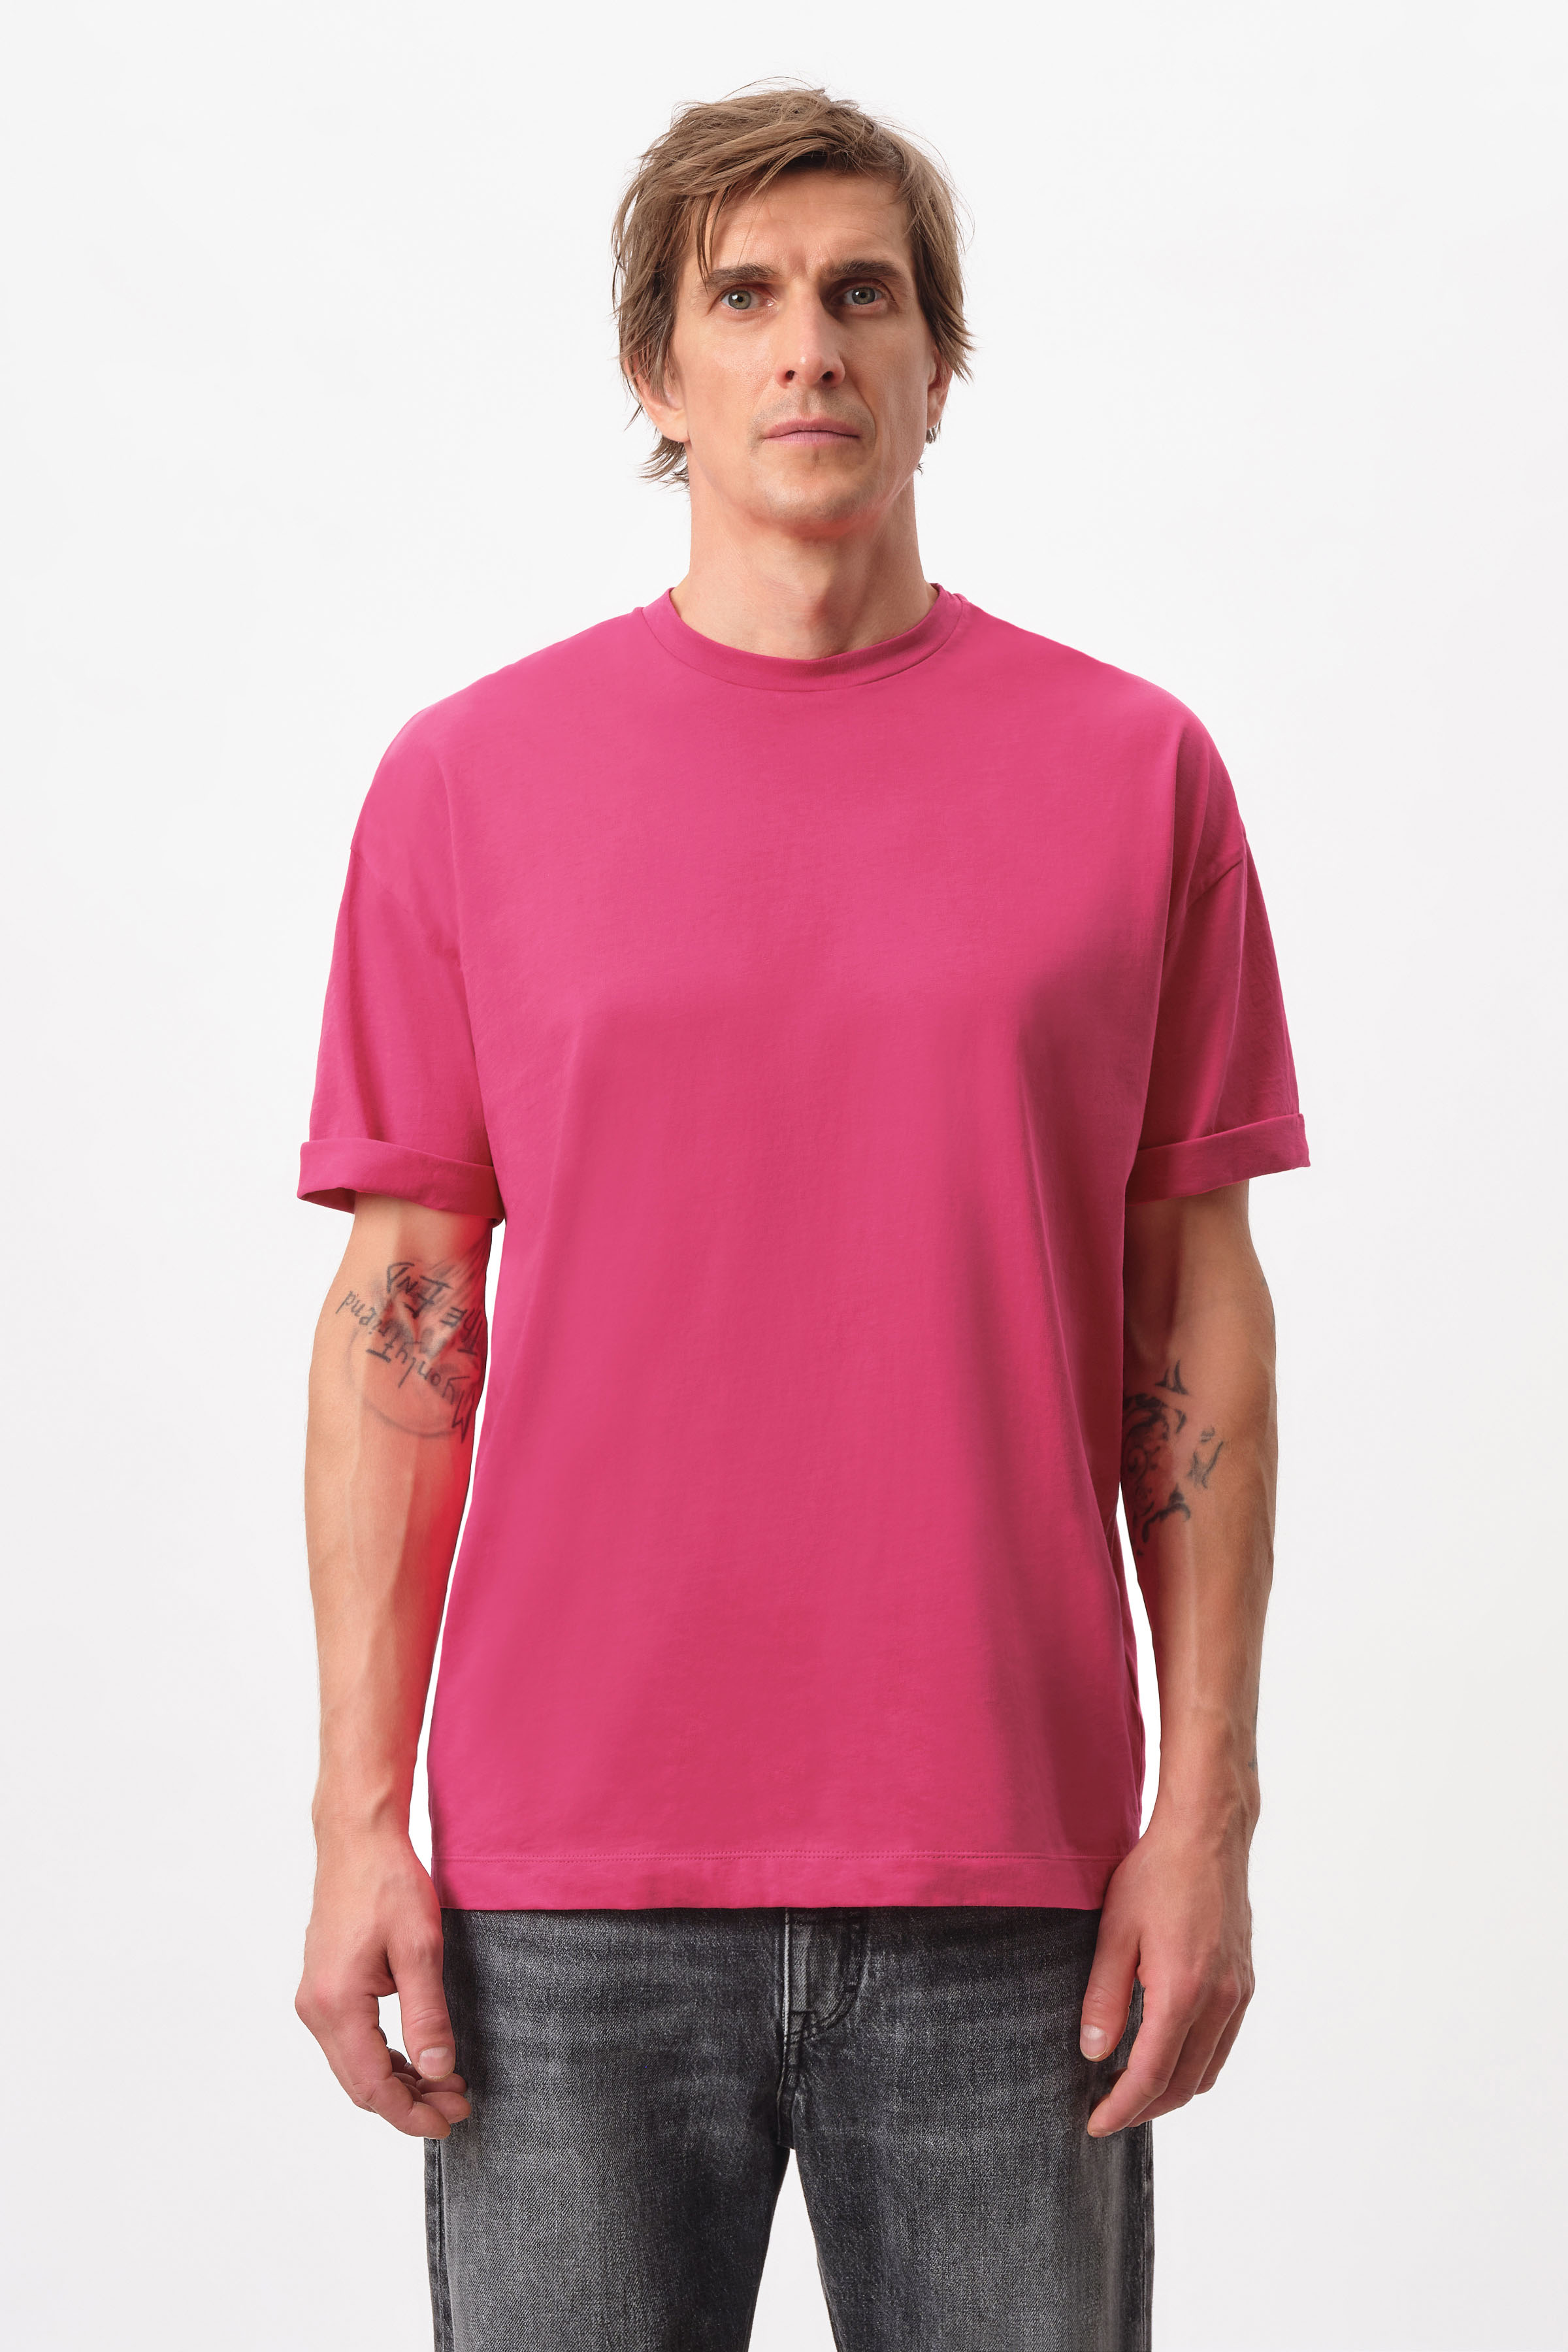 T-Shirts online at DRYKORN